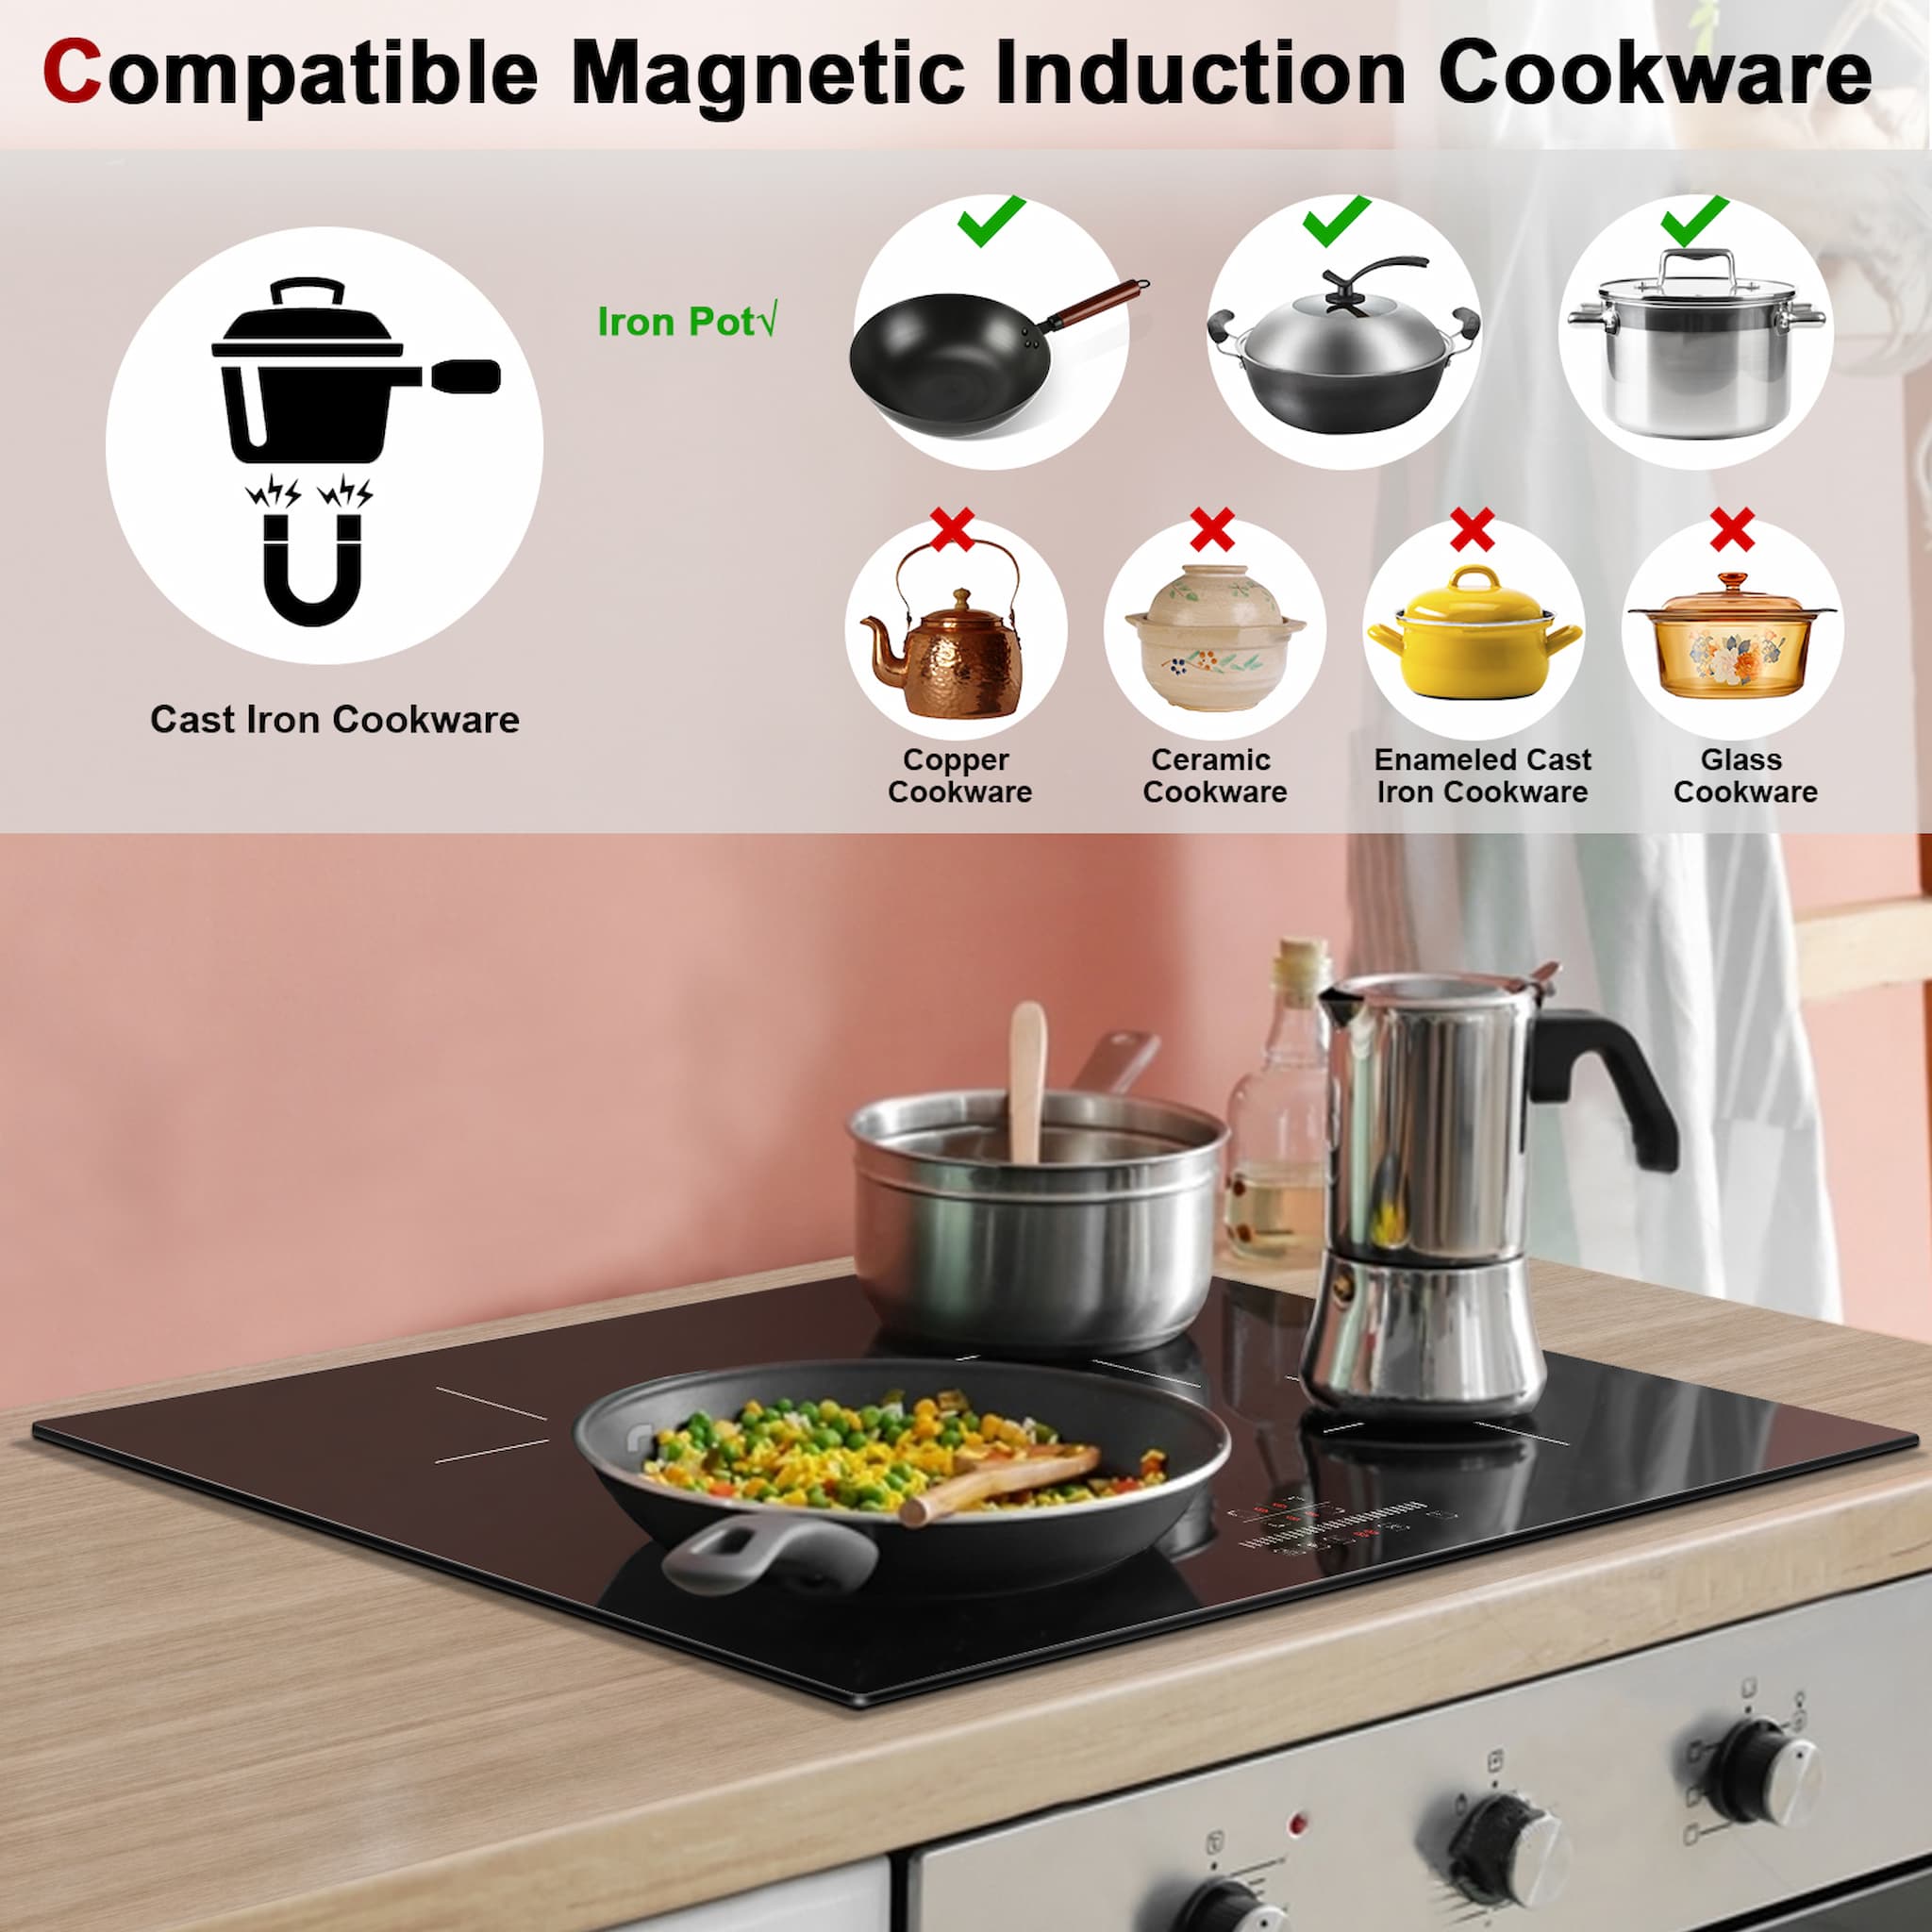 Multifunctional 30 Inch Induction Cooktop 4 Burners Slider control 9 Power setting 99 mins Timer Auto switch off High Temperature Warning（show "H") Child Safety Lock Over-Temperature Protection Total power 7200W: Lower left:1500W/1800W, Upper left:2100W/2500W, Lower right:1500W/1800W, Upper right:2100W/2500W.